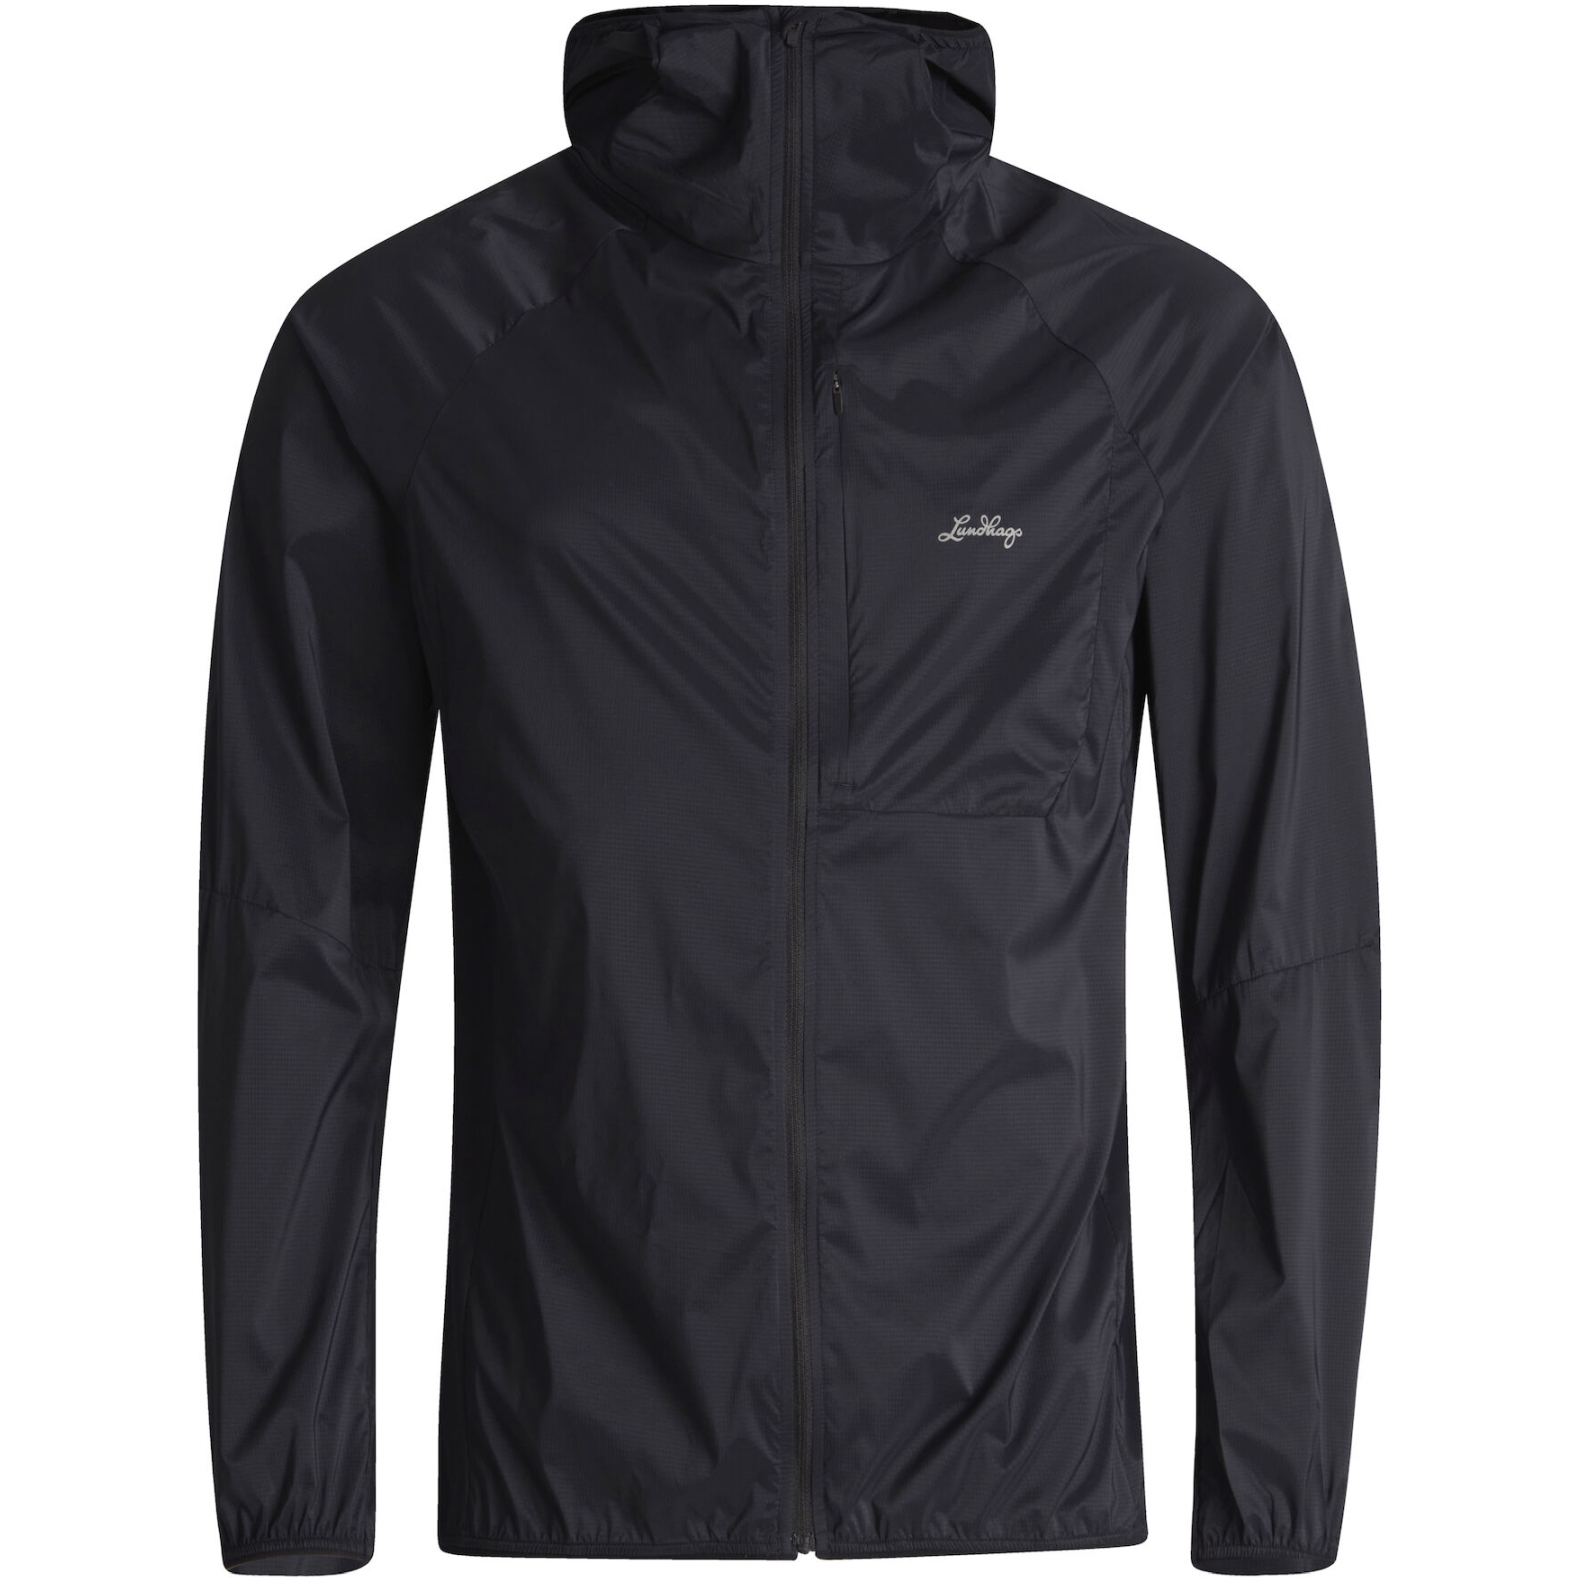 Picture of Lundhags Tived Light Wind Jacket - Black 900